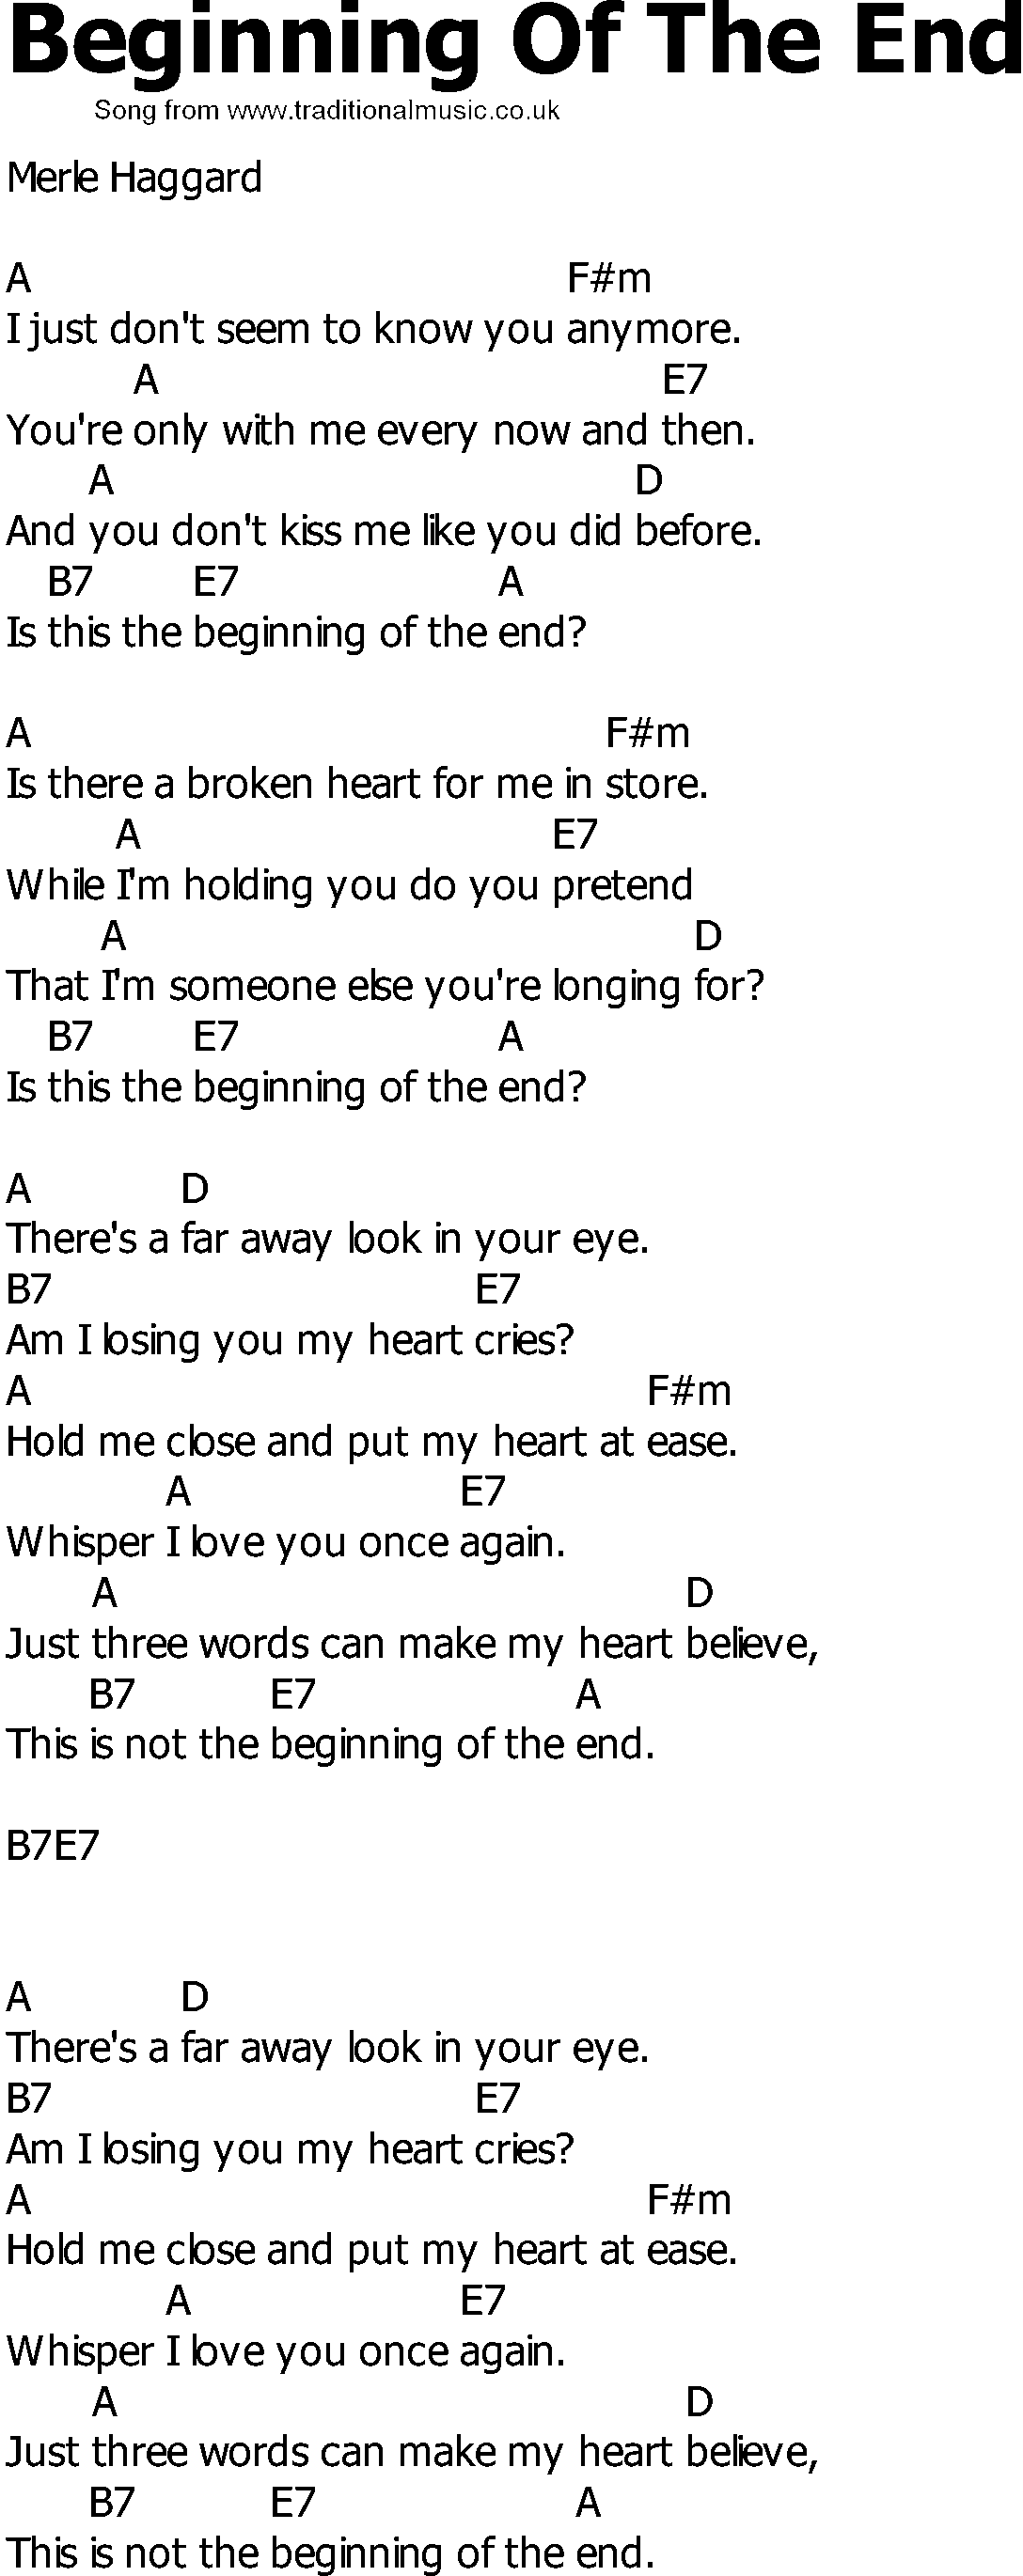 Old Country song lyrics with chords - Beginning Of The End